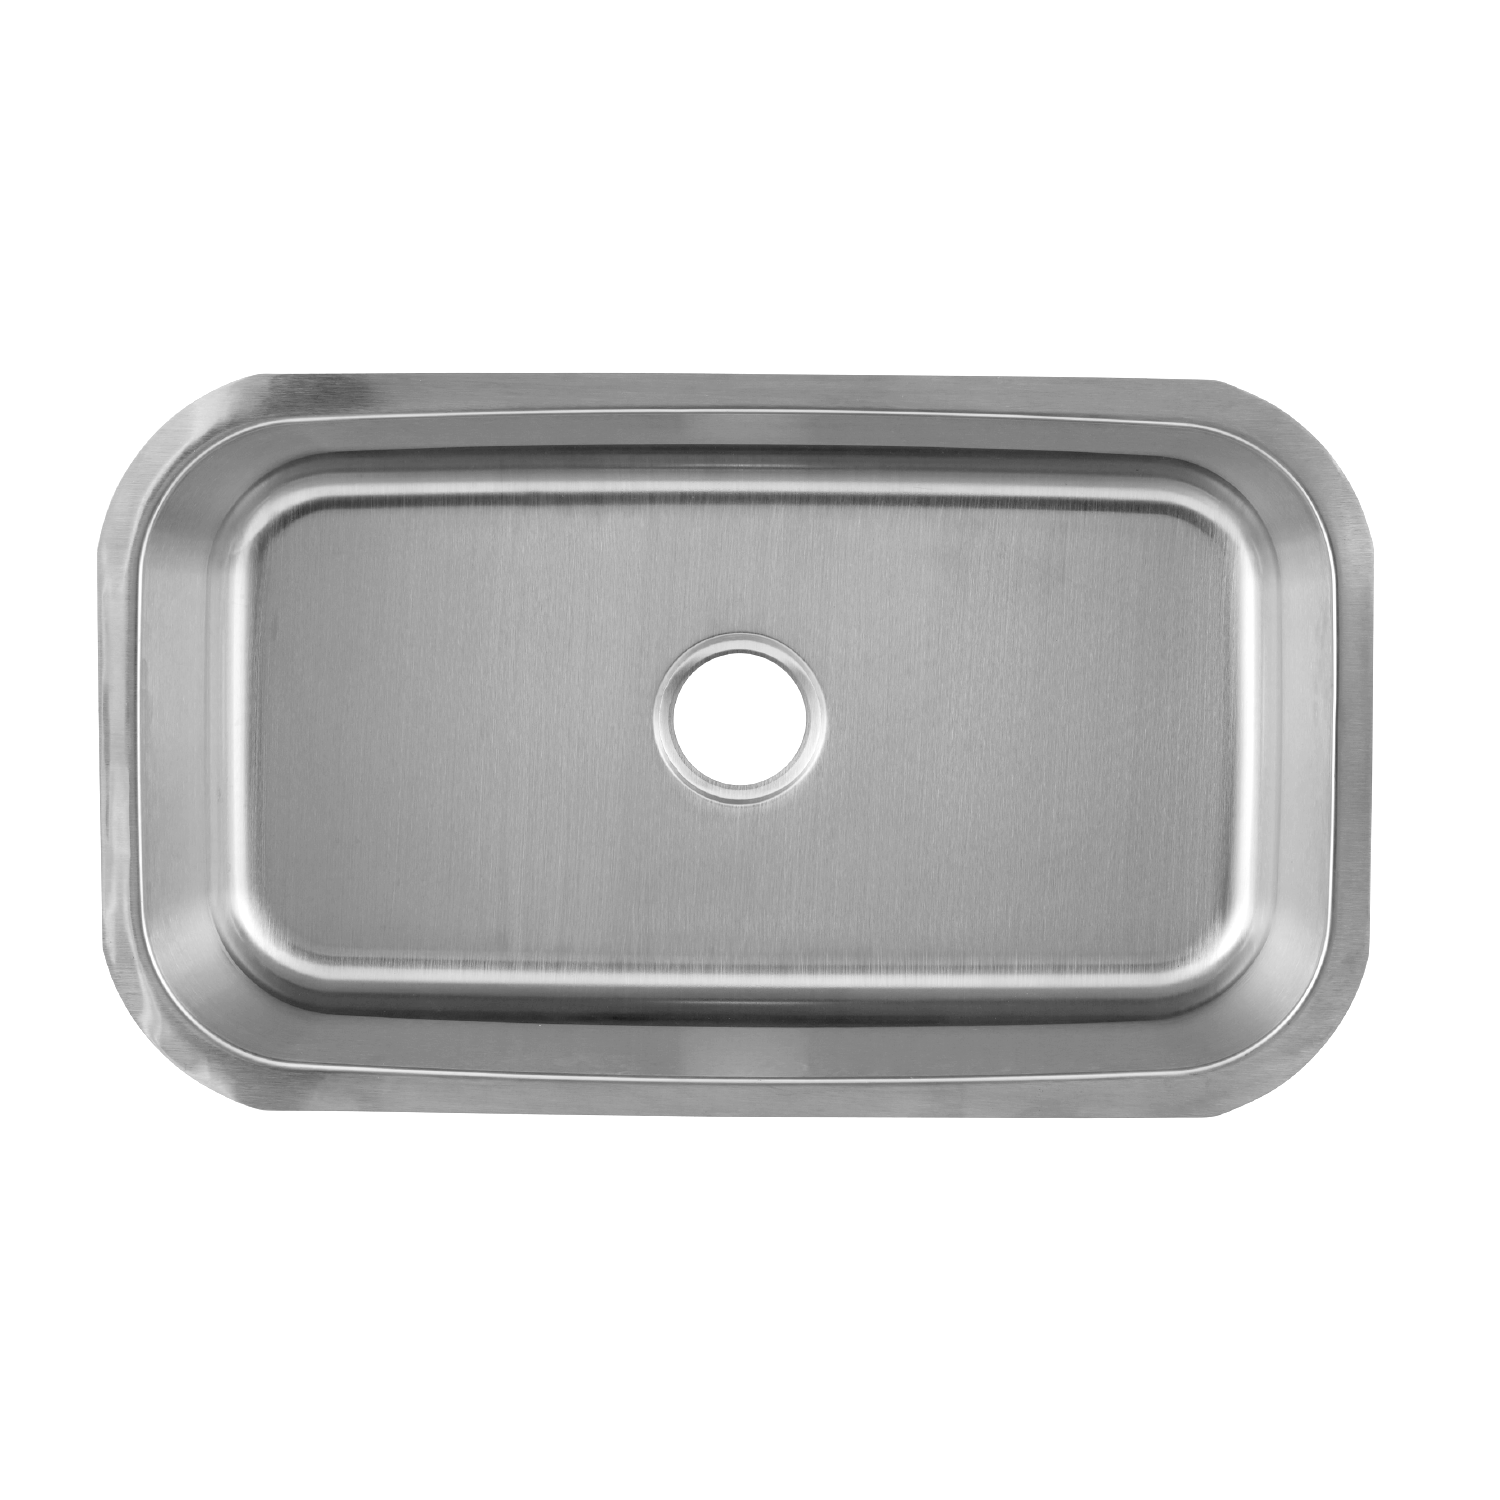 DAX Single Bowl Undermount Kitchen Sink, 18 Gauge Stainless Steel, Brushed Finish , 30 x 18 x 9 Inches (KA-3018)